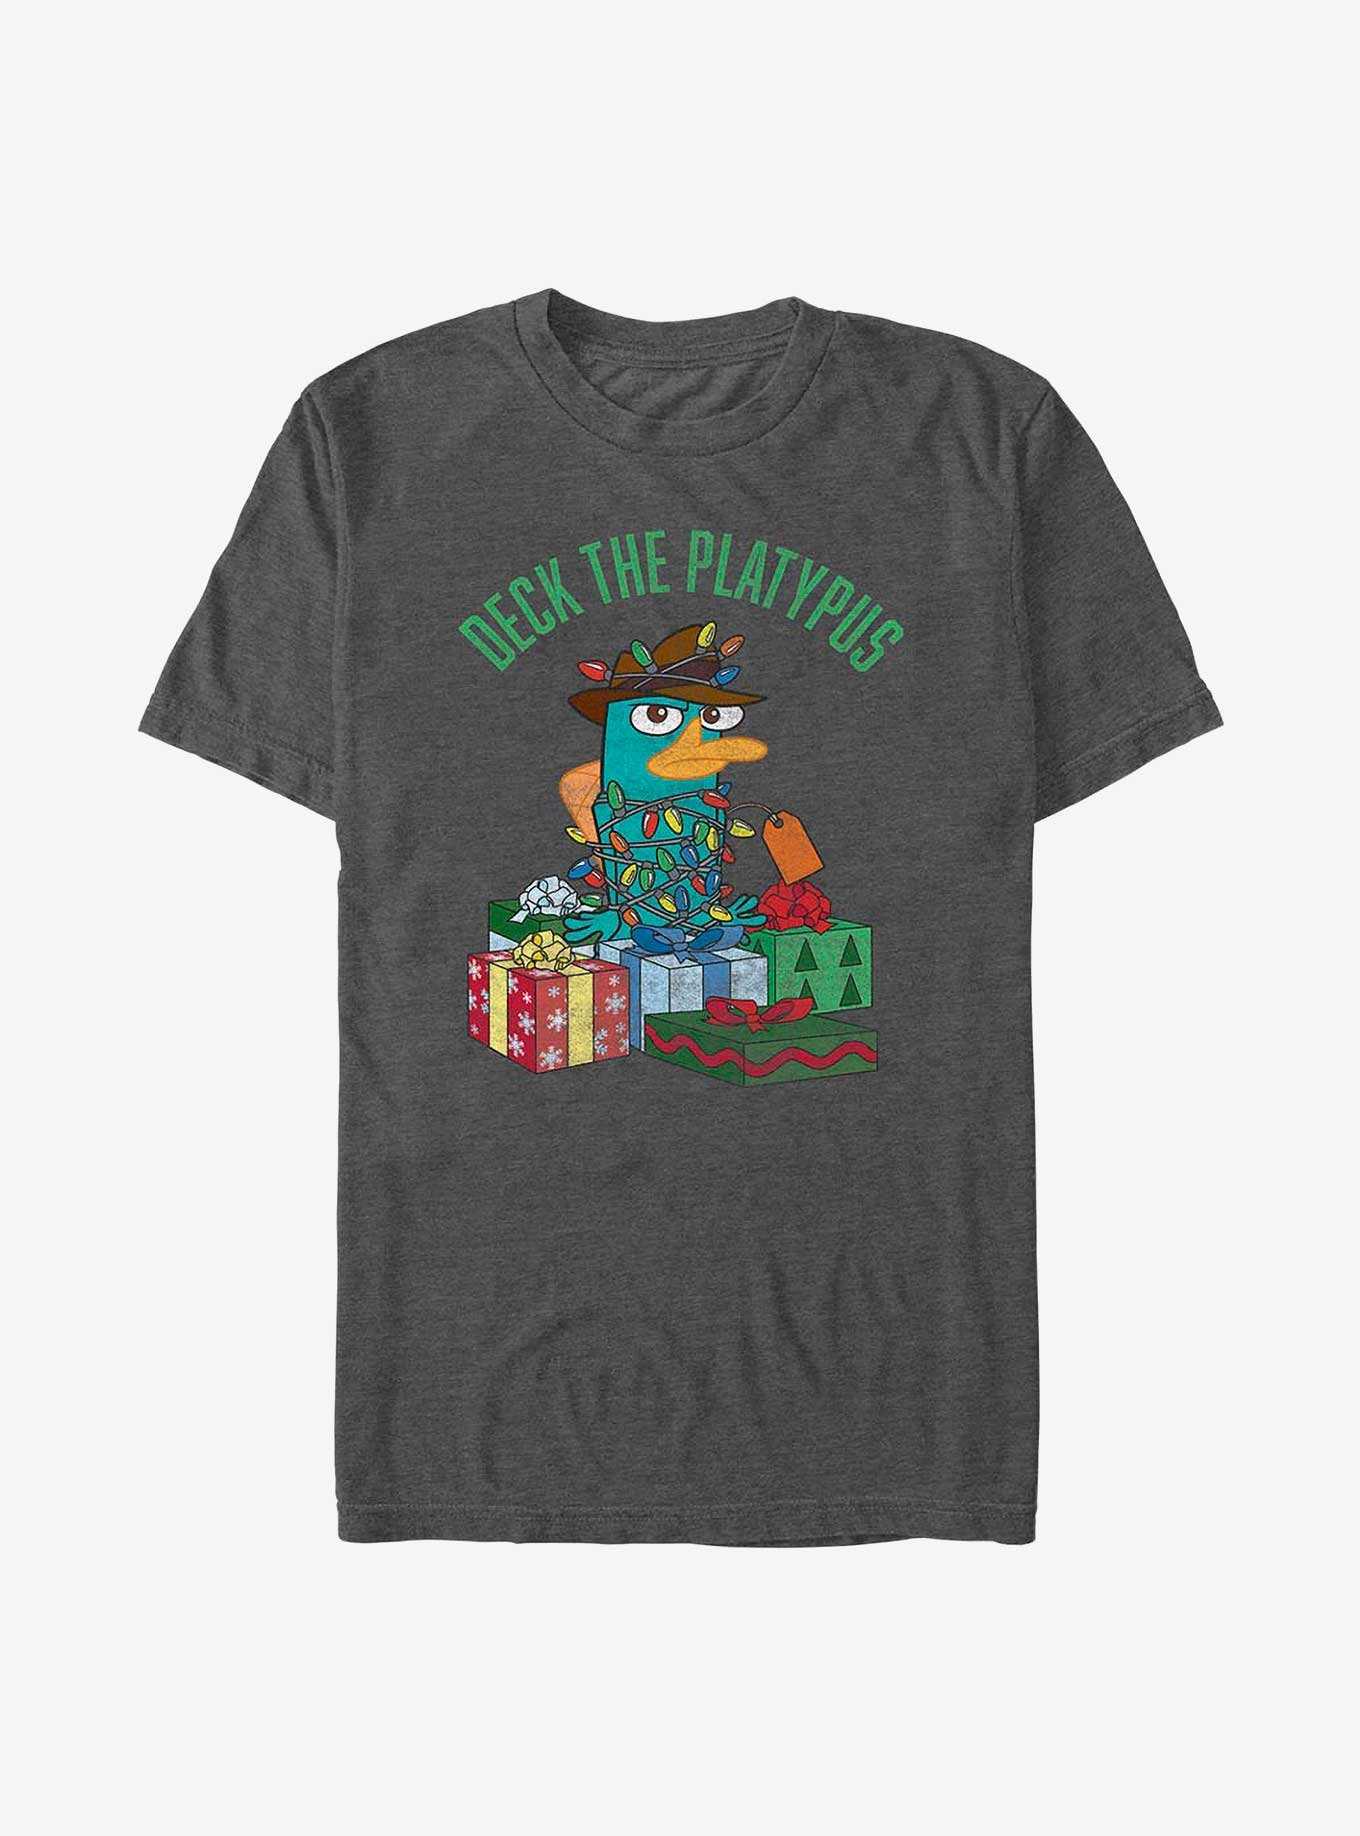 Disney Phineas And Ferb Wrapped Up Perry T-Shirt, , hi-res